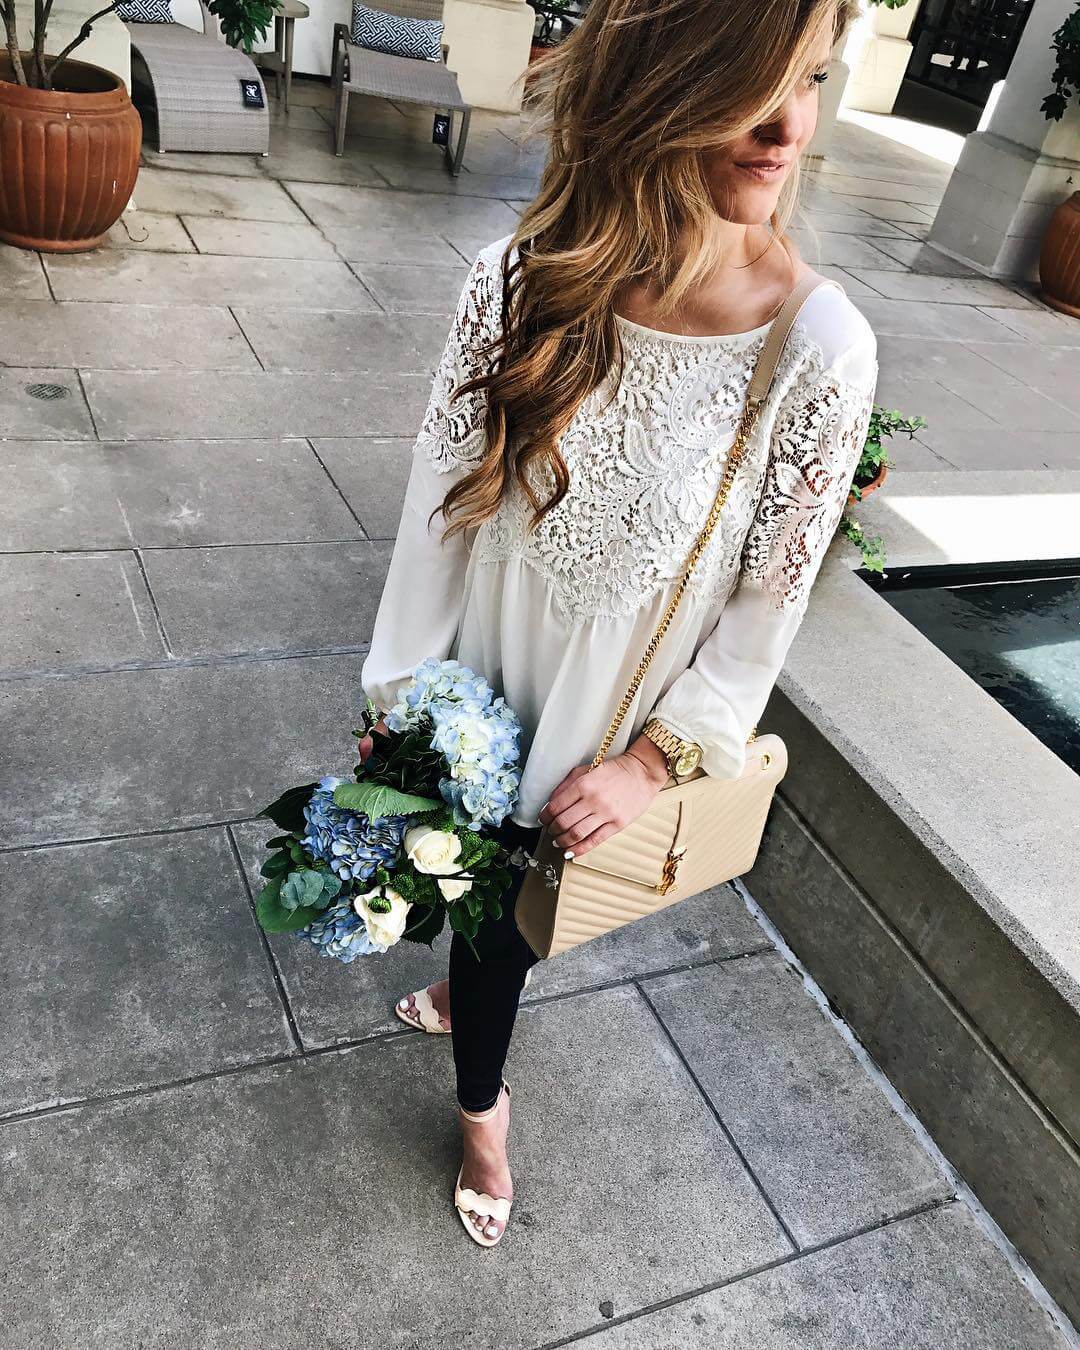 brighten keller wearing lace top with jeans and flowers 